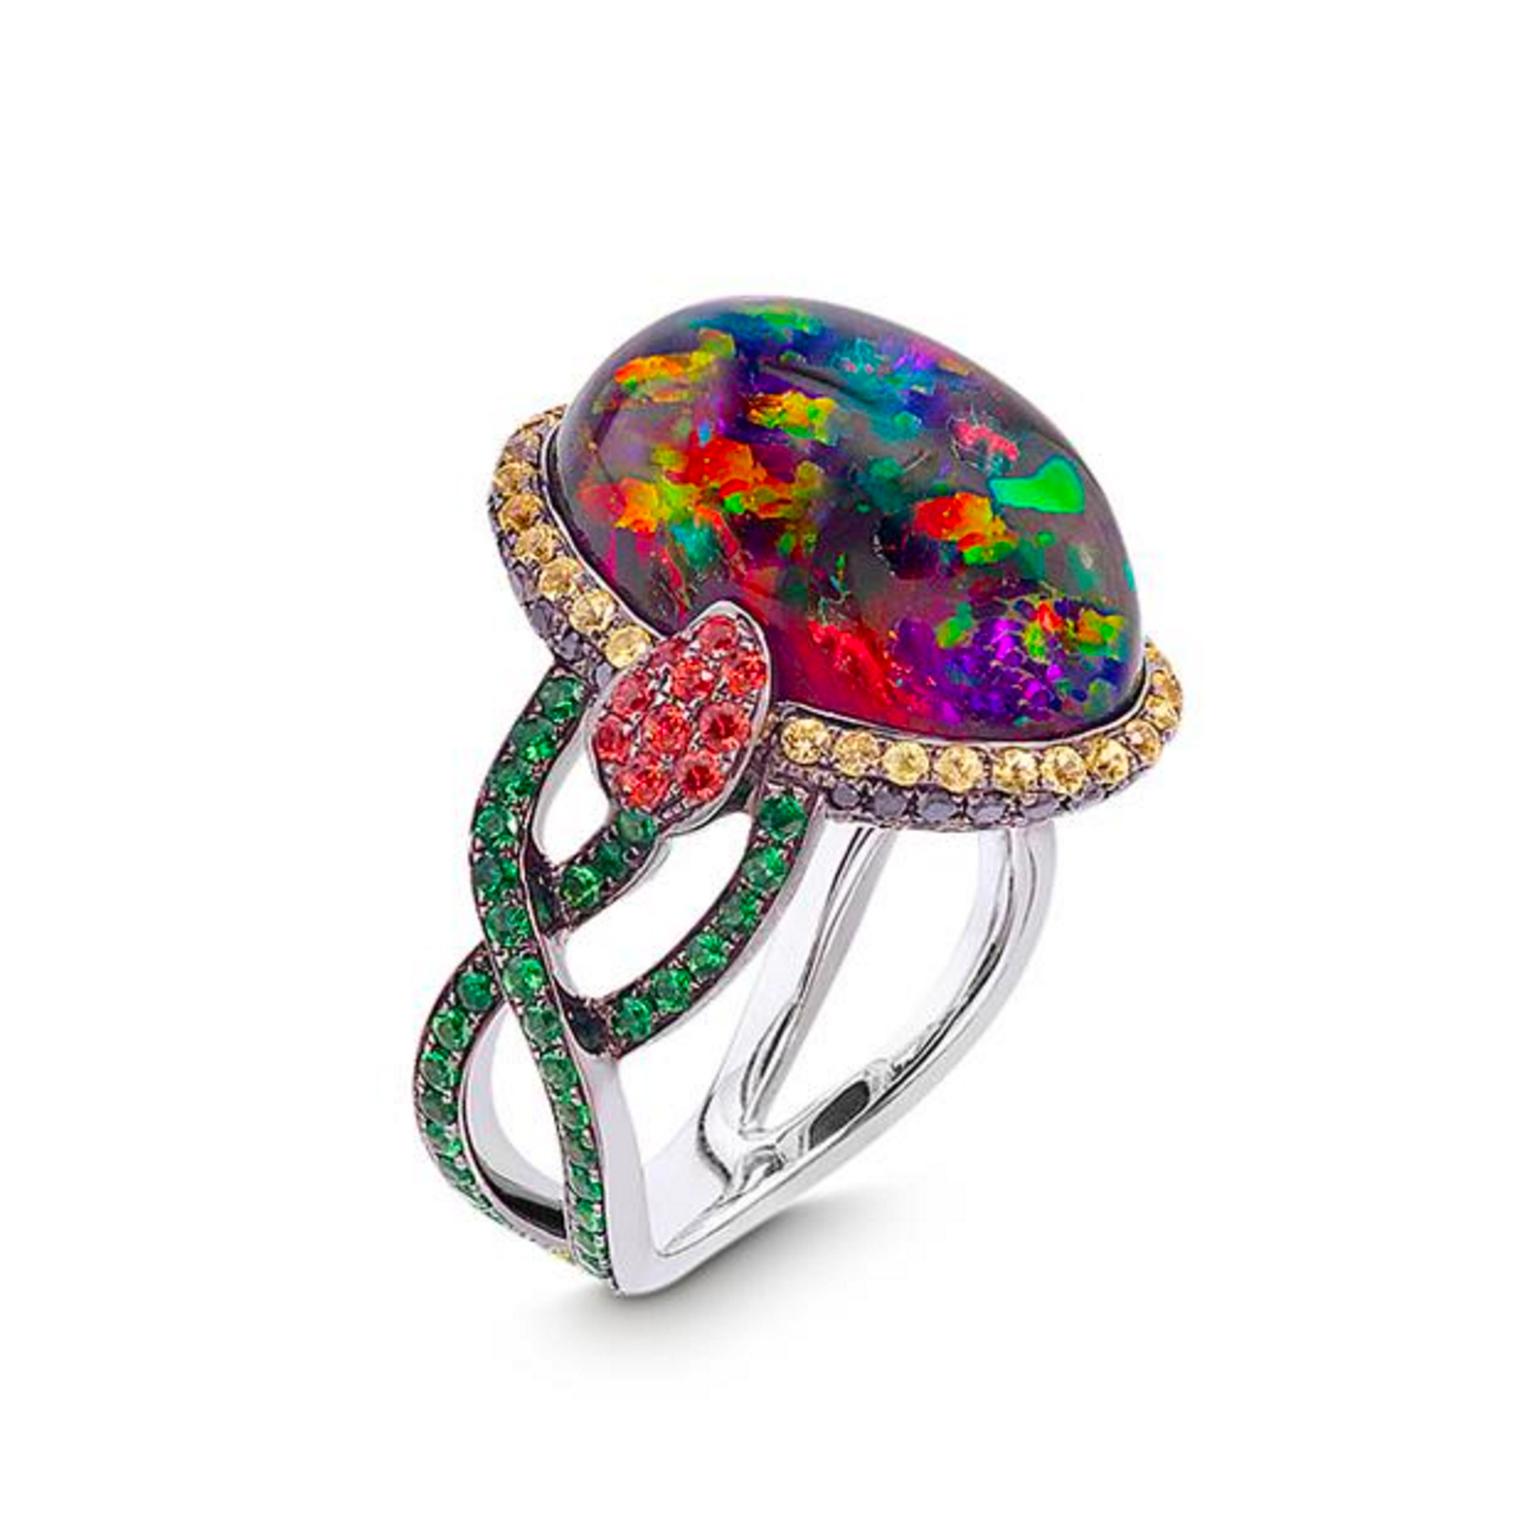 Katherine Jetter Femme Fatale Mexican anhydrous opal ring